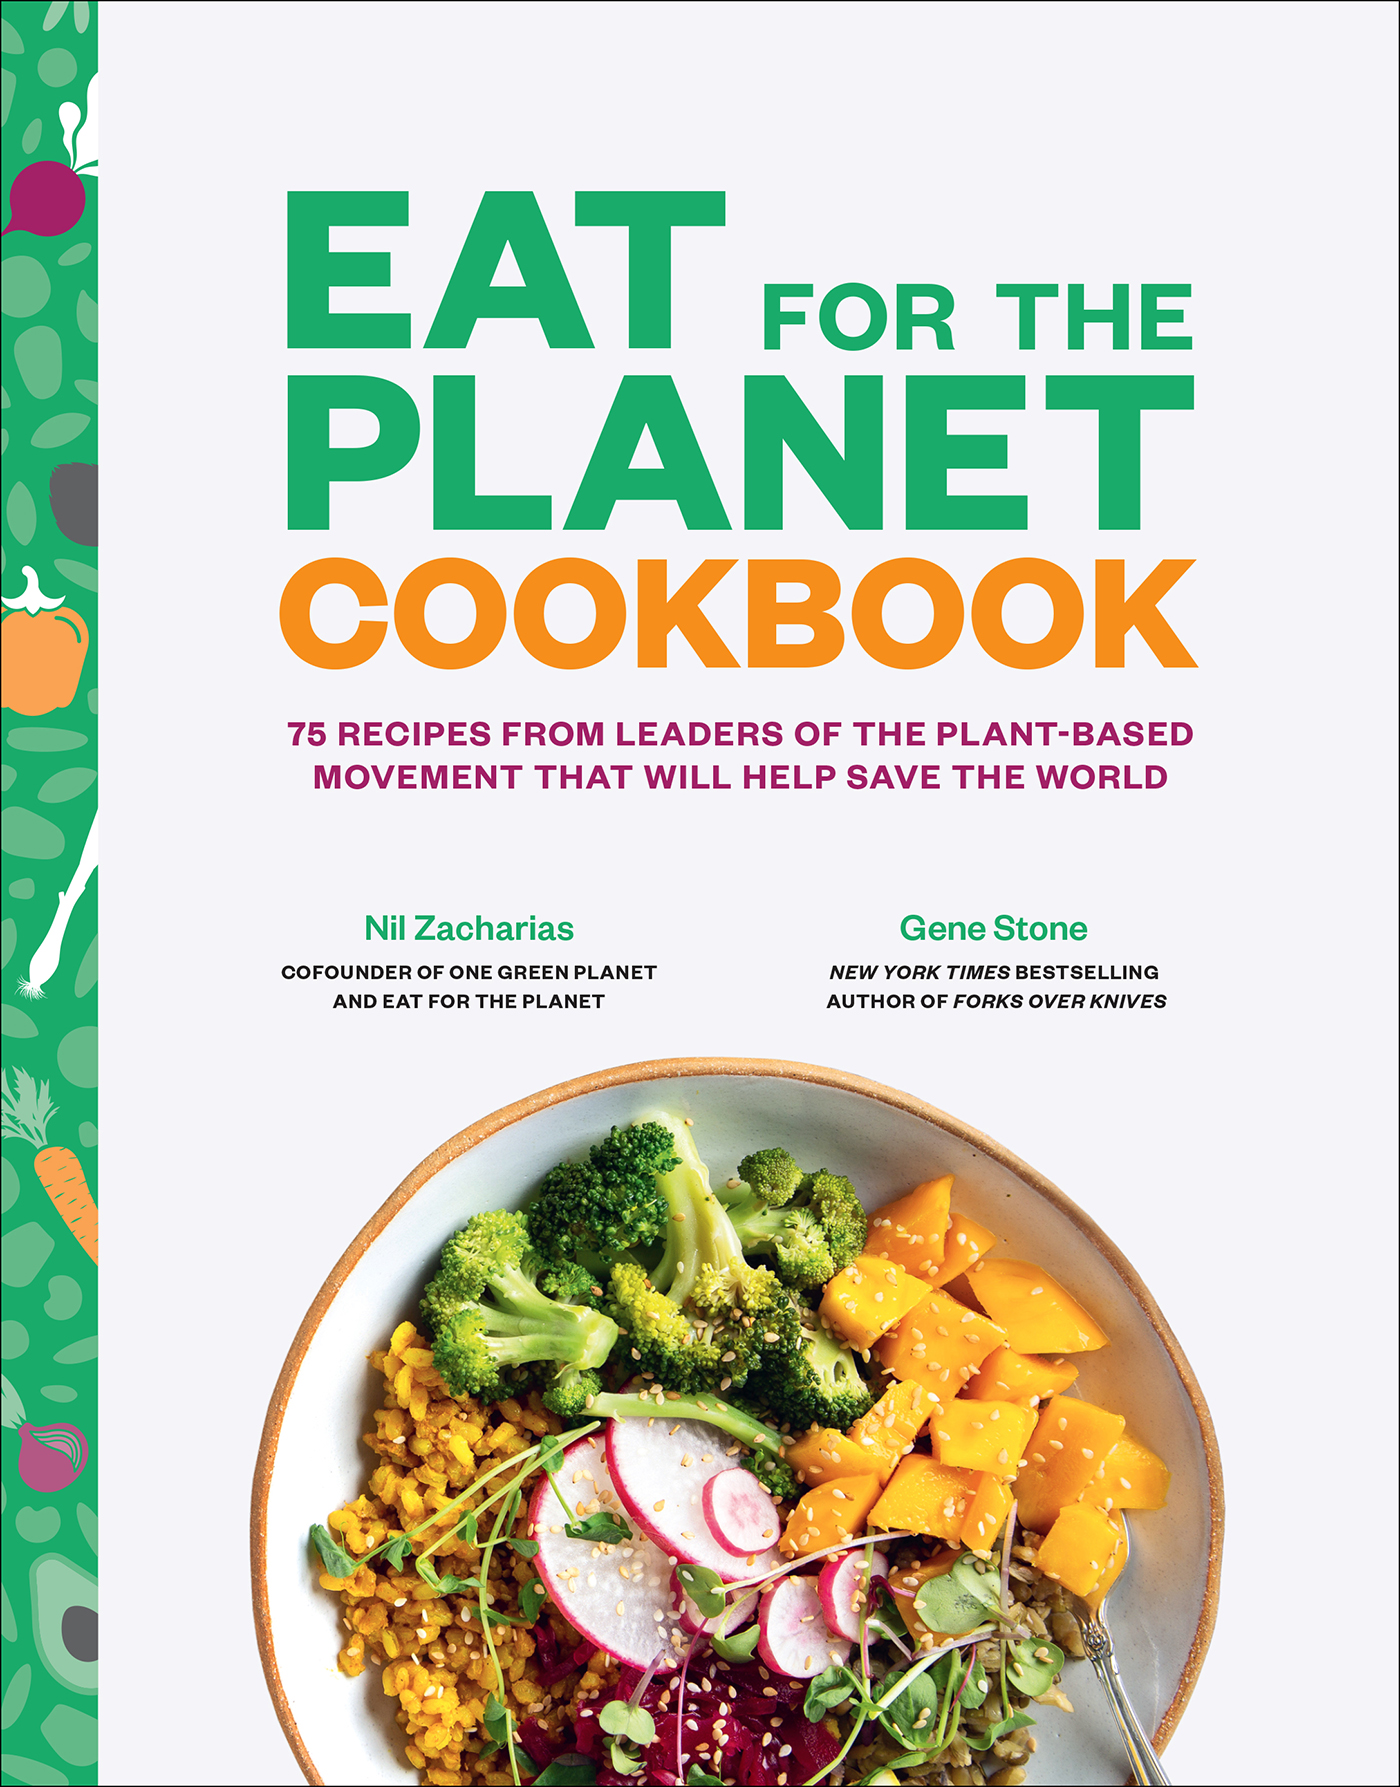 Contents In 2018 we published a book called Eat for the Planet - photo 1